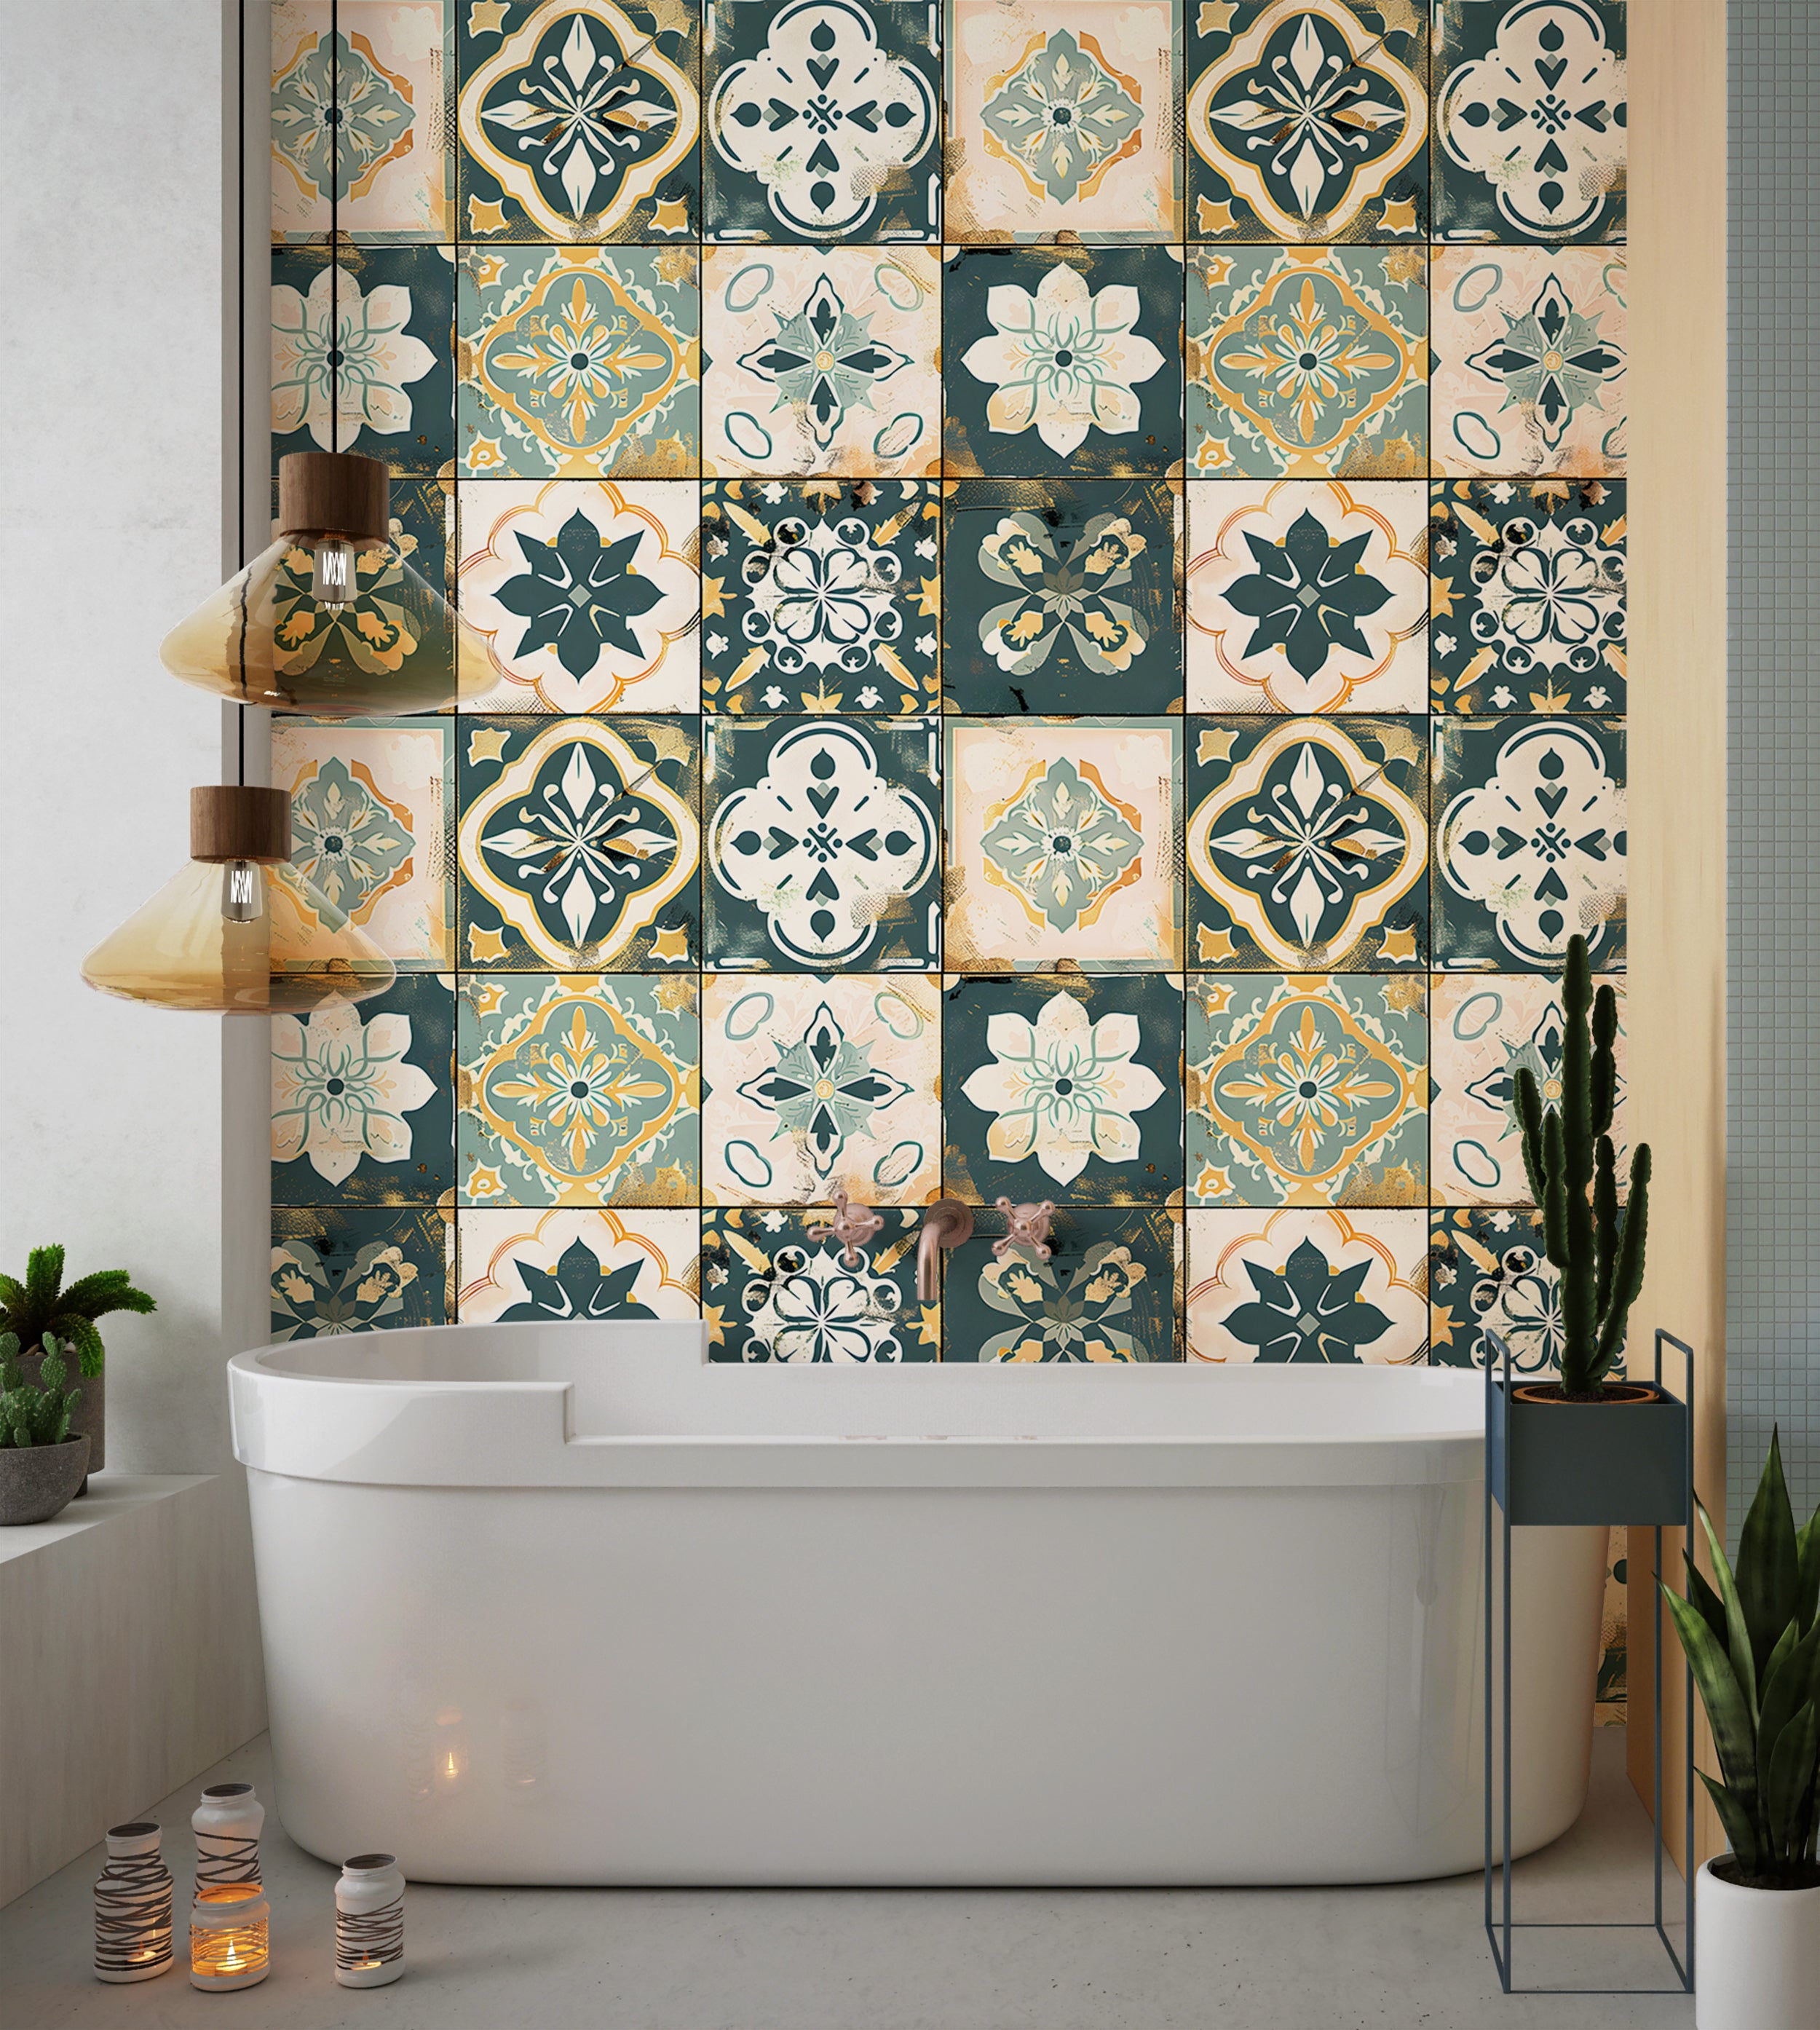 Patchwork Tiles Wallpaper, Peel and Stick Moroccan Wall Decal, Removable Floral Tile Style Wallpaper, Rustic Colors Vintage Wall Decor